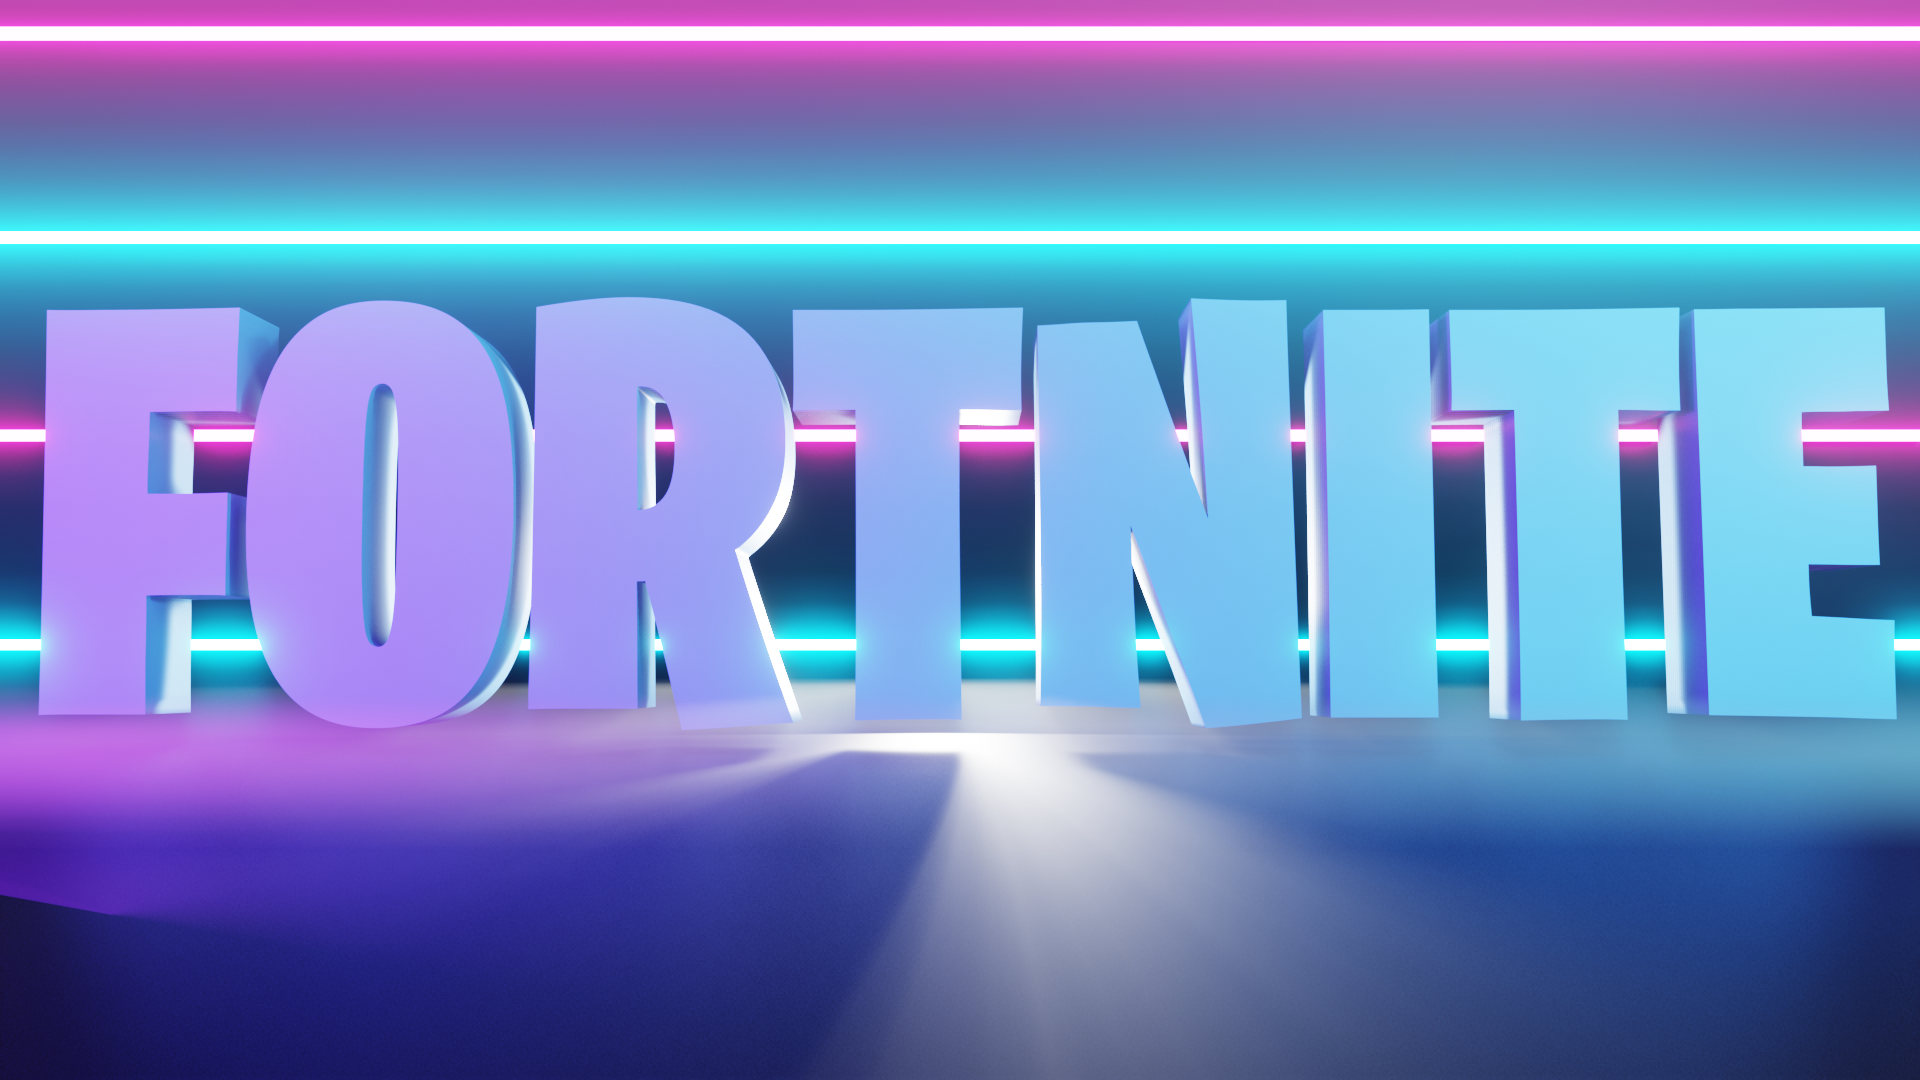 Just the Fortnite Logo background I used on my last render without for you guys to use